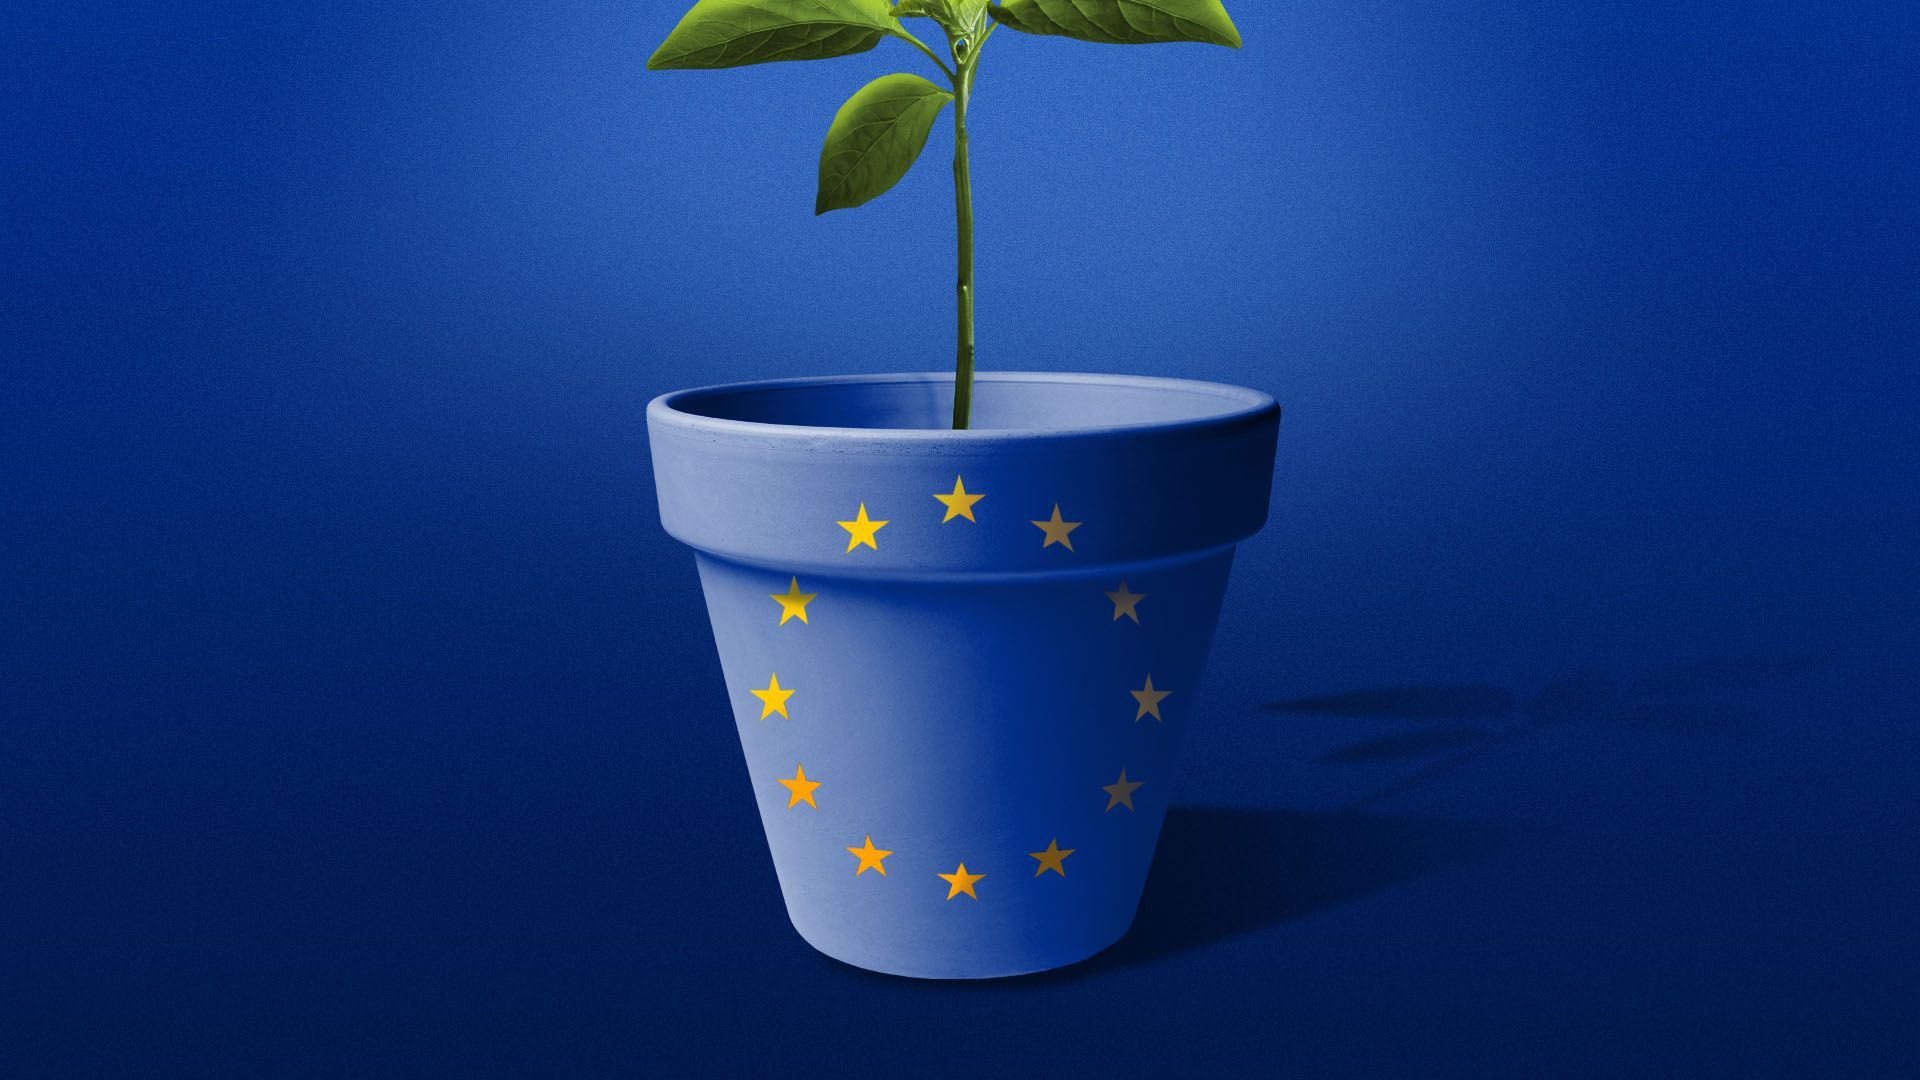 Illustration of a plant potter with the EU flag on it.